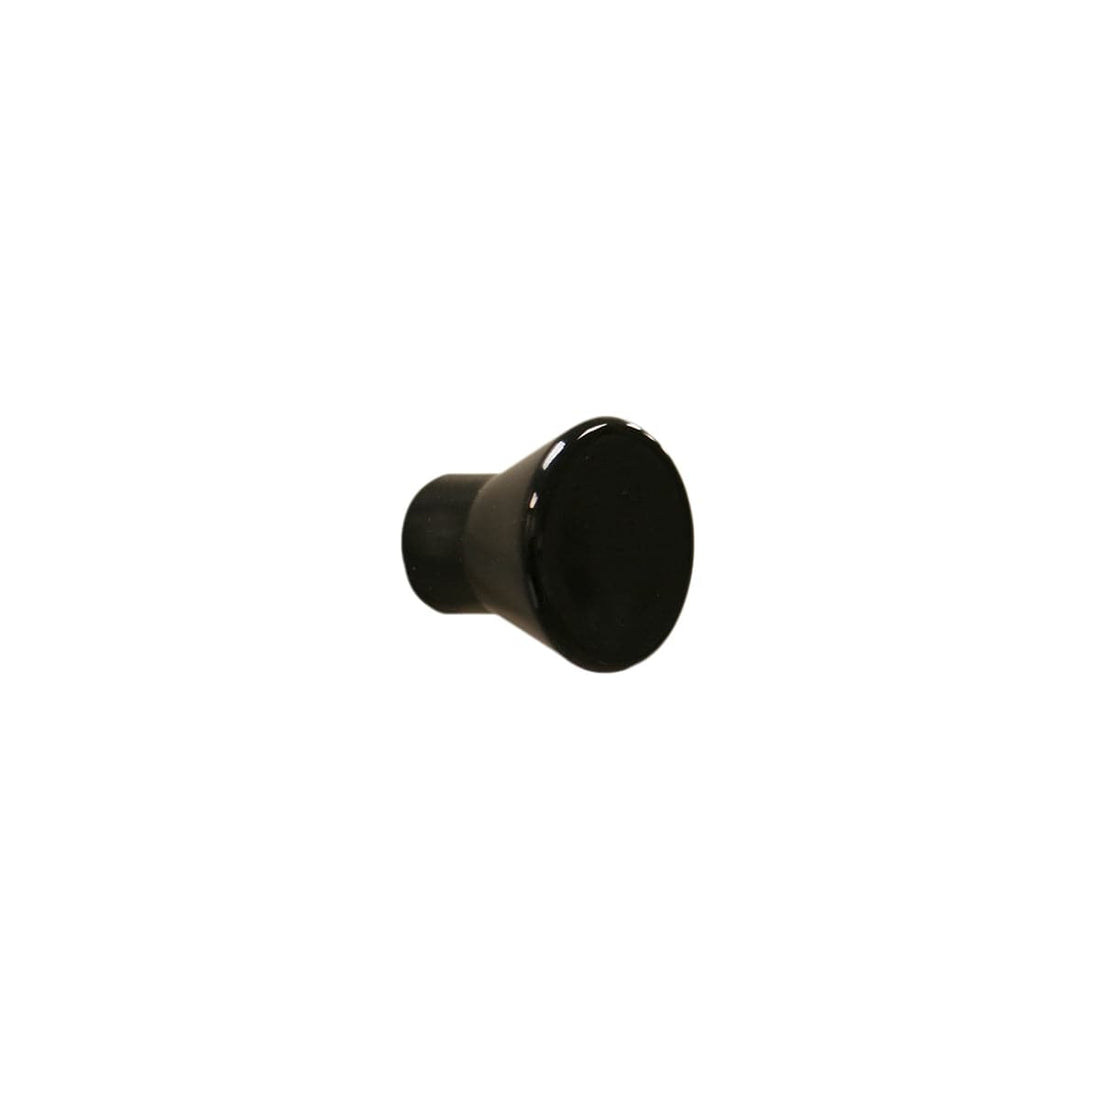 2 D 22 MM KNOBS IN BLACK RECYCLED PLASTIC